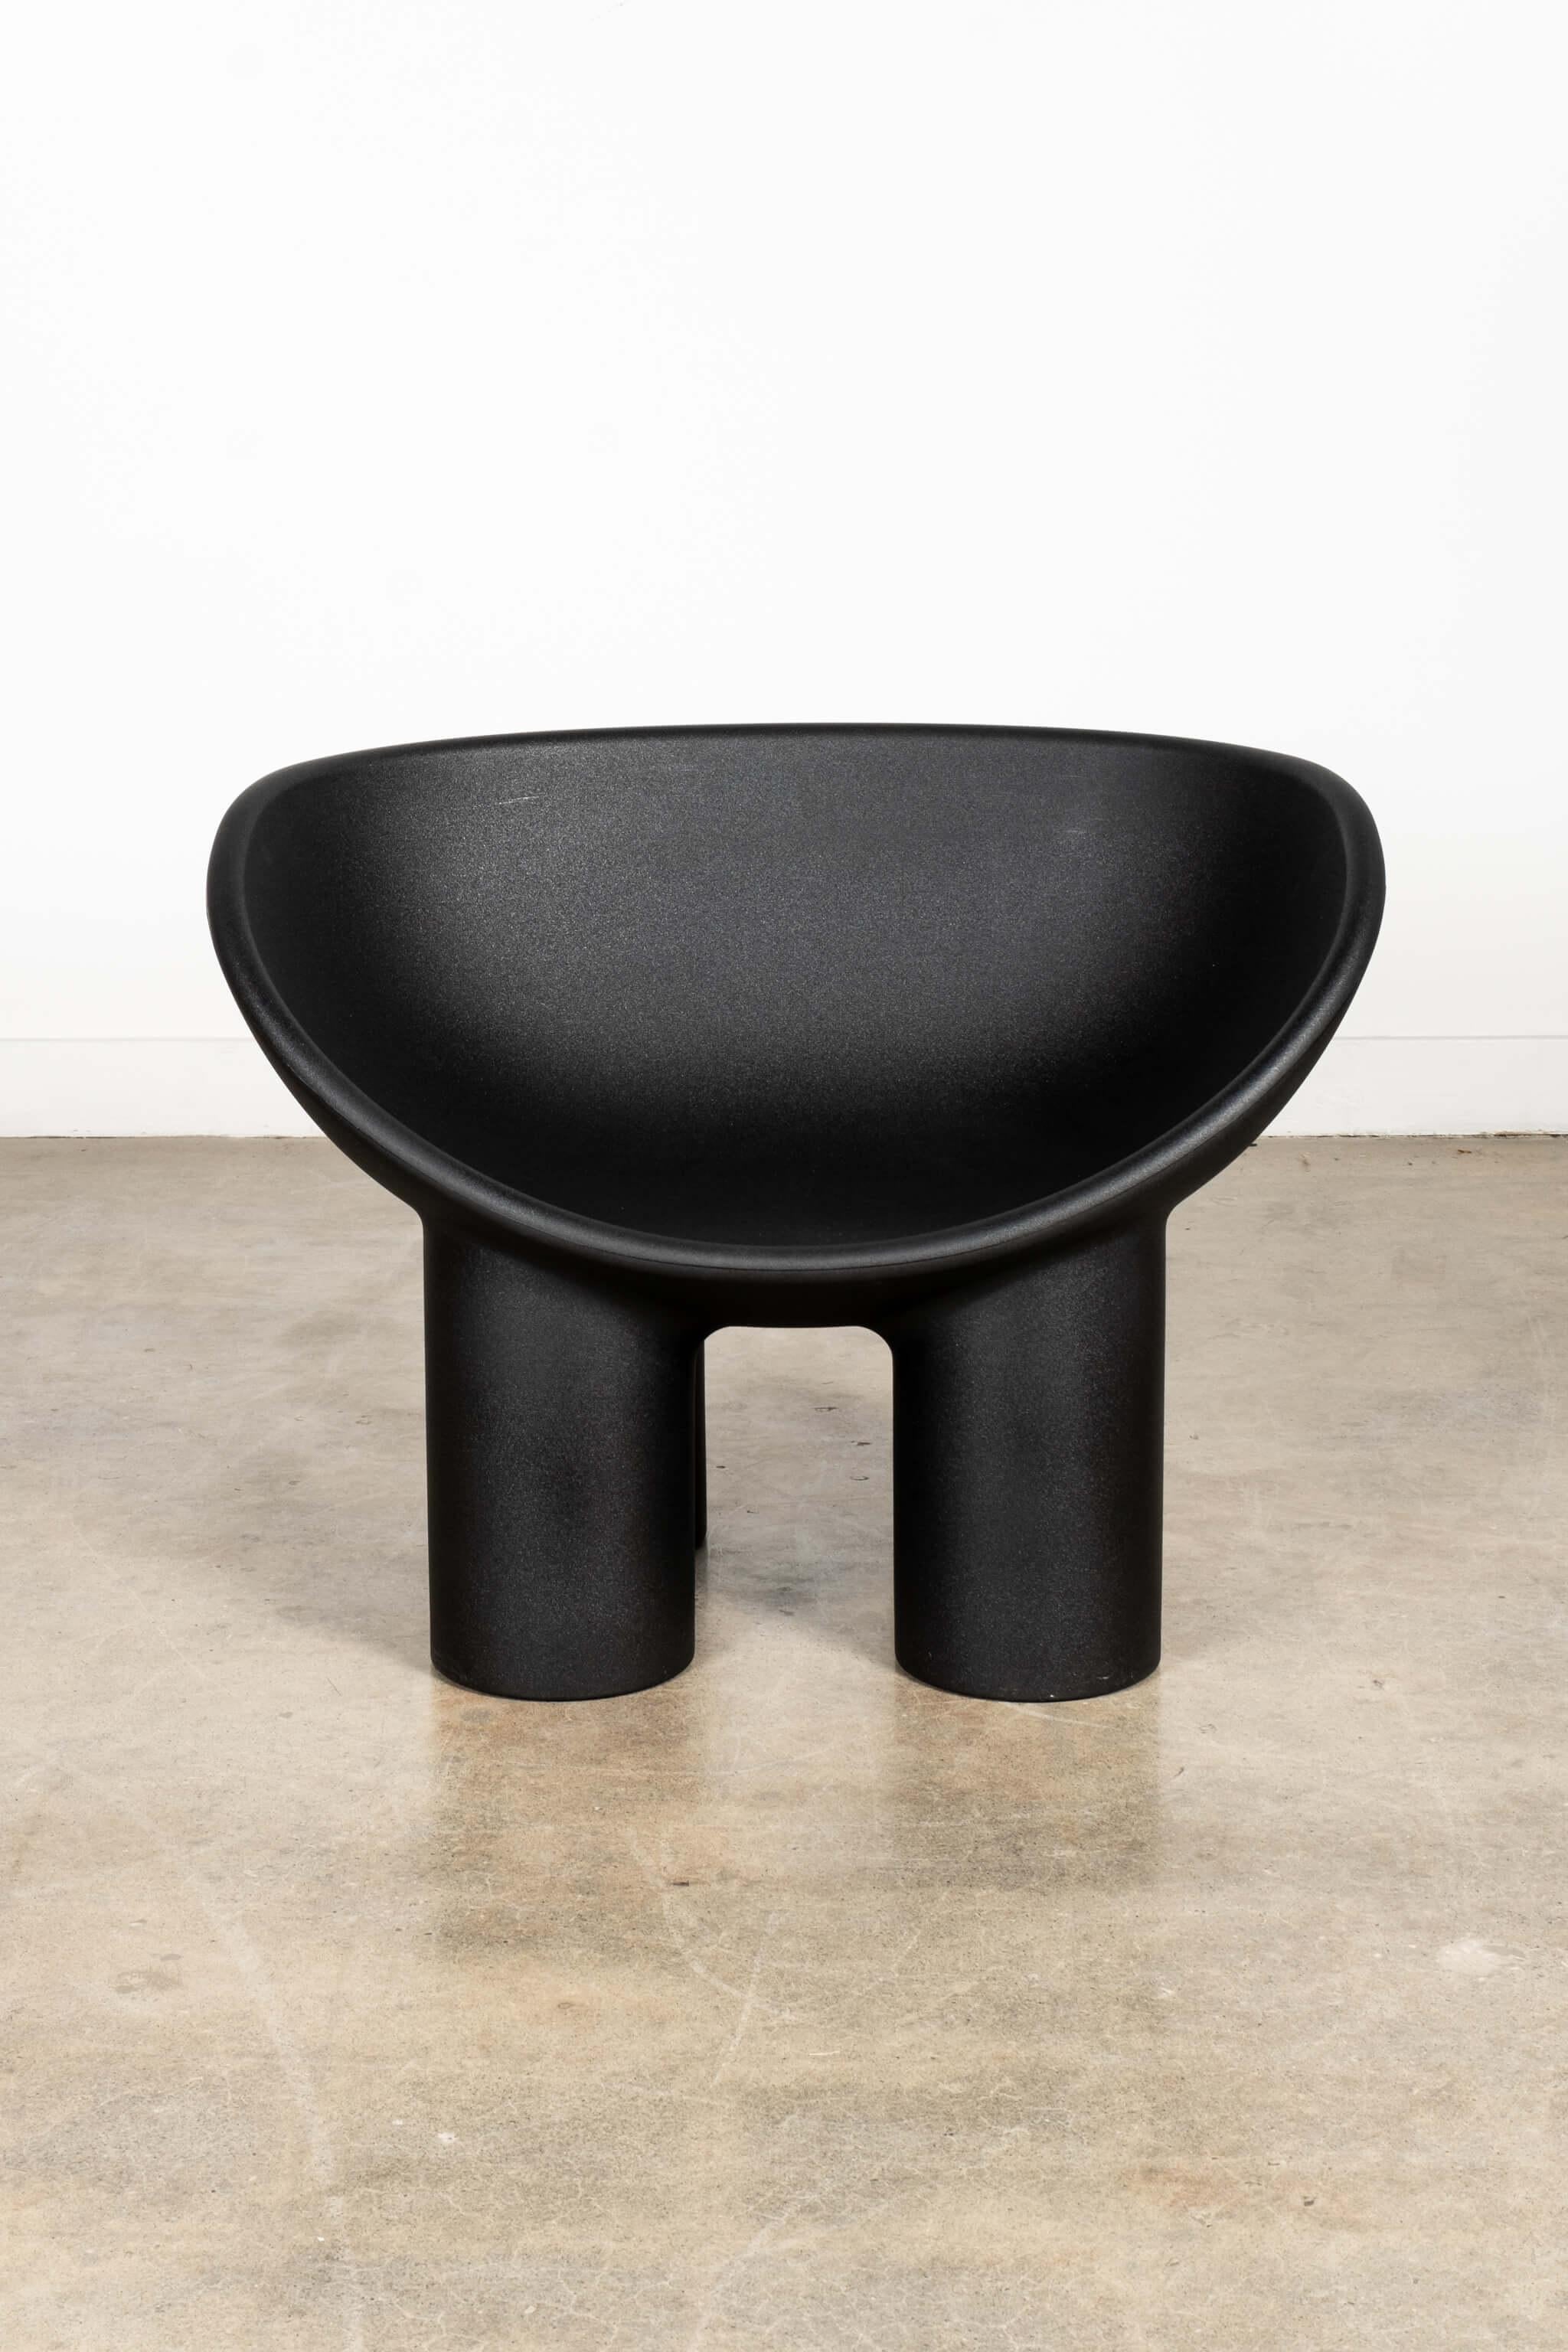 Italian Roly Poly Chair by Faye Toogood for Driade